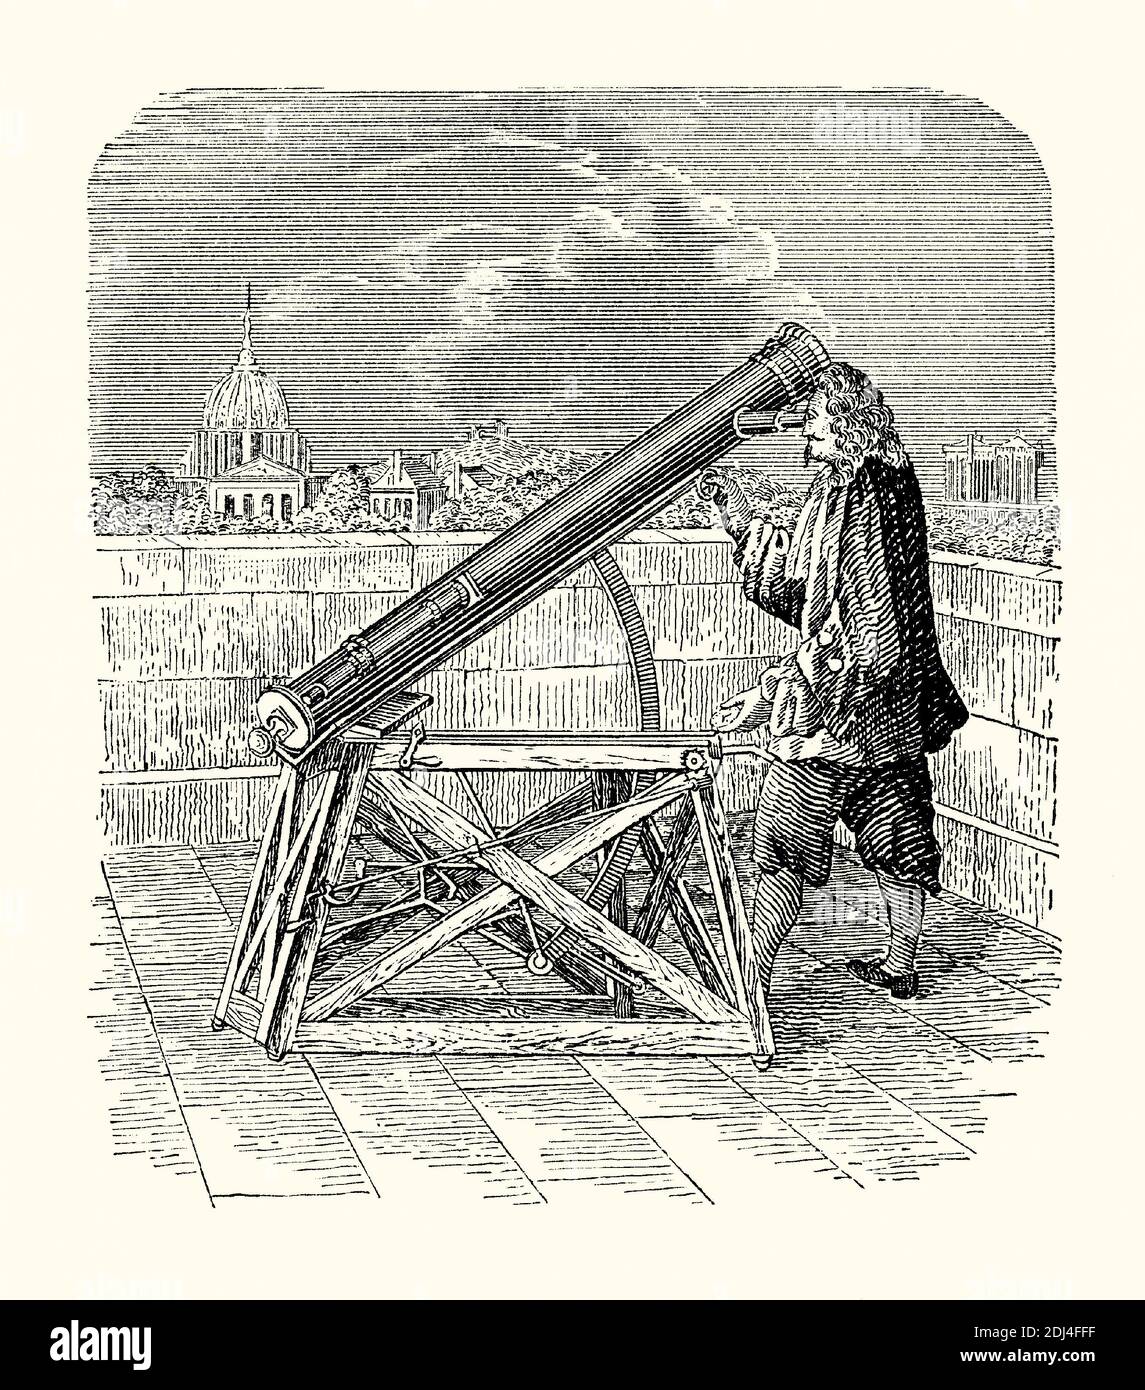 An Old Engraving Showing Isaac Newton And His Reflecting Telescope London England Uk C 1670 7074